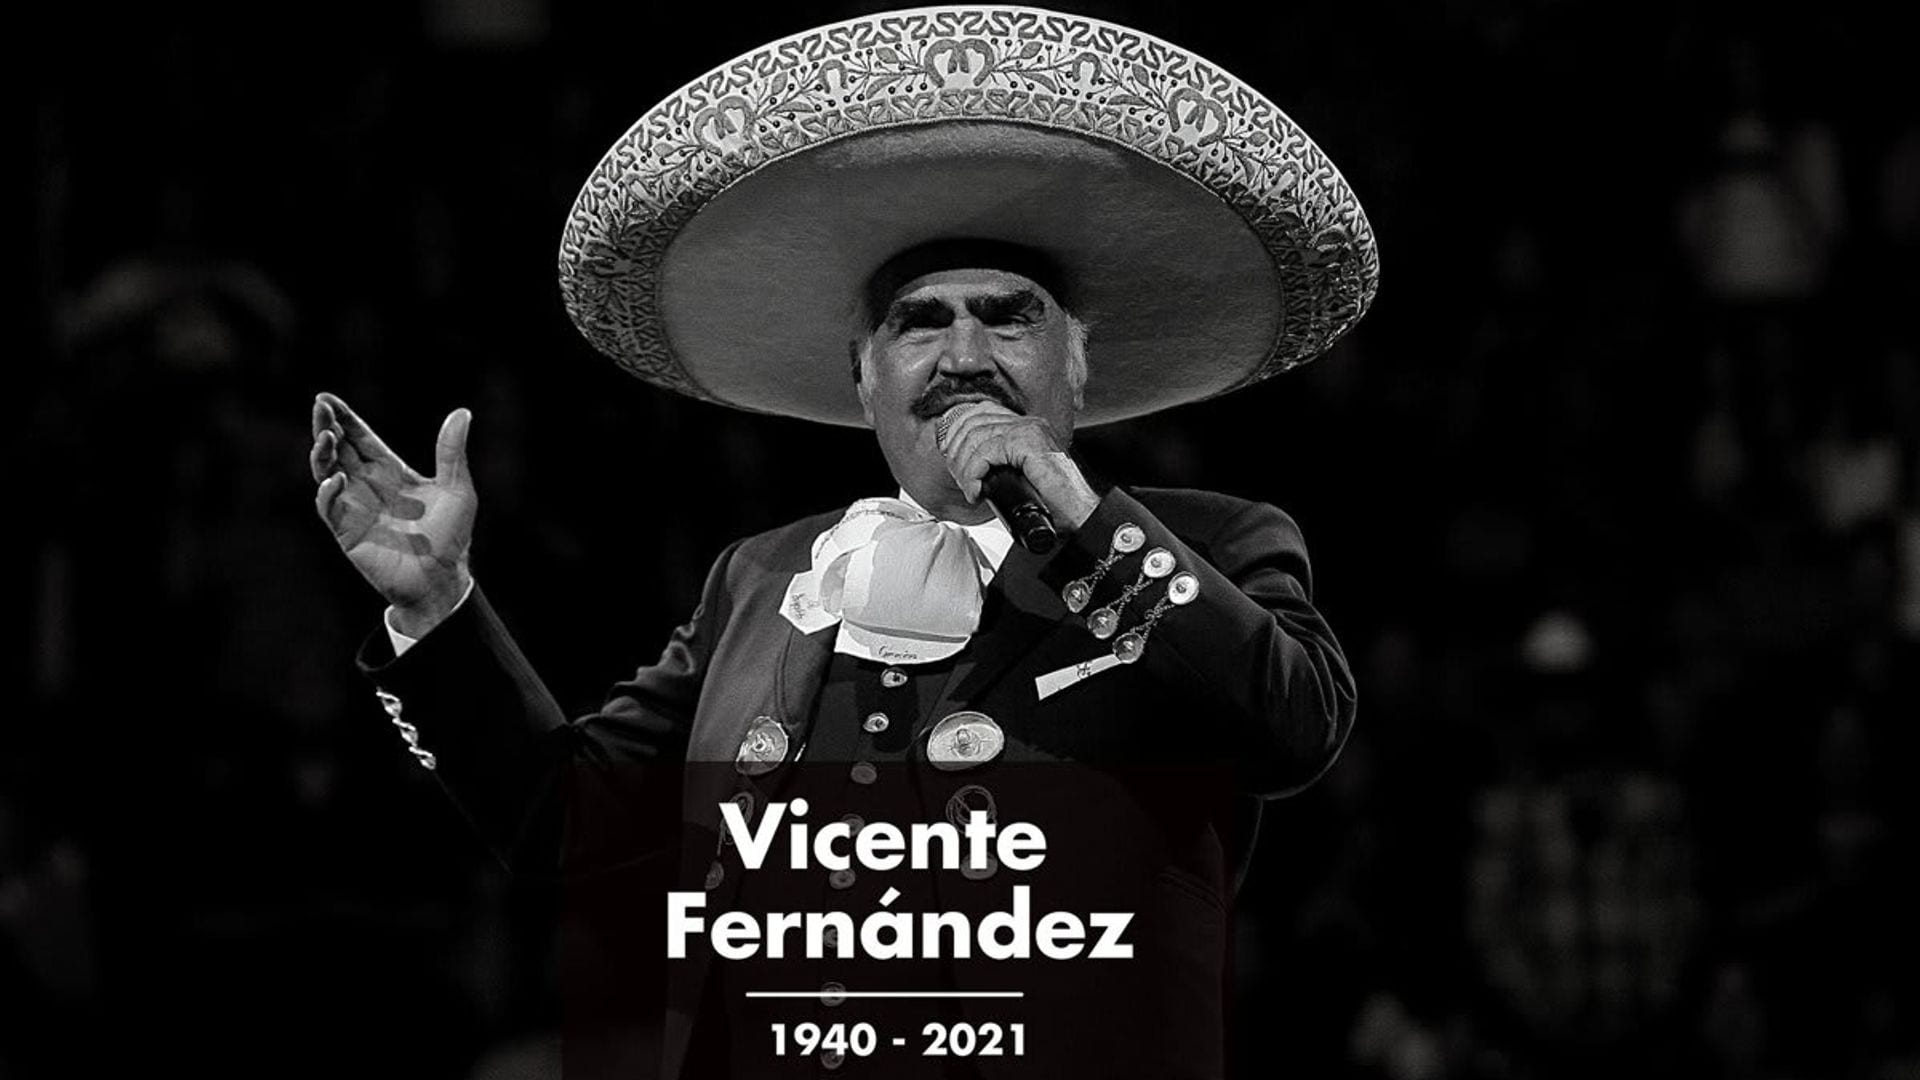 Vicente ‘Chente’ Fernández, the ‘King of Rancheras’ and Mexican music icon, dies at 81